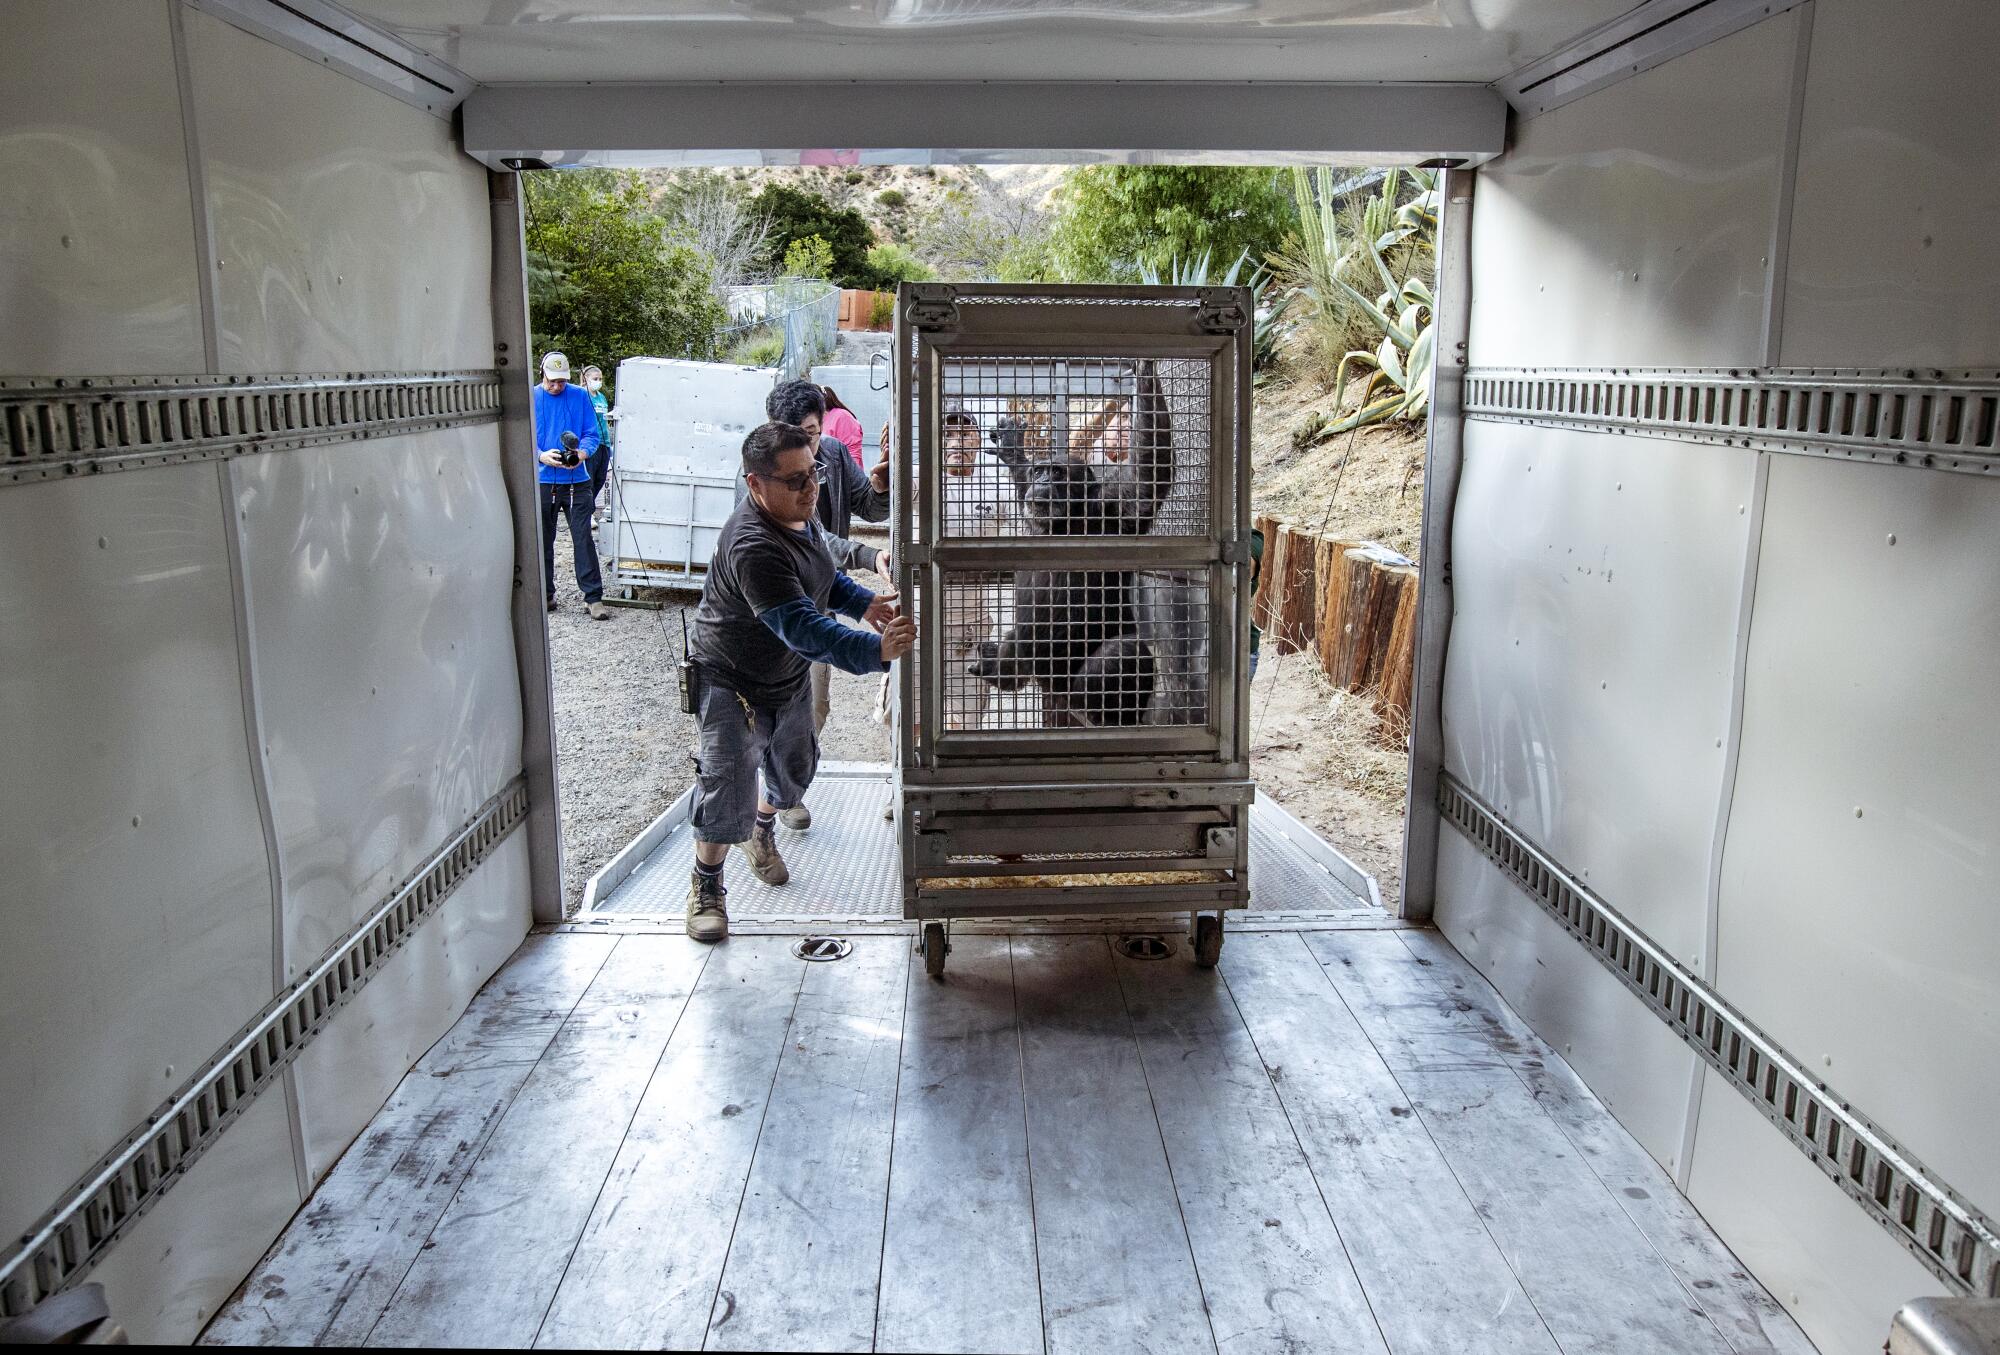 A chimpanzee in a transport cage is wheeled up a ramp into a cargo bay